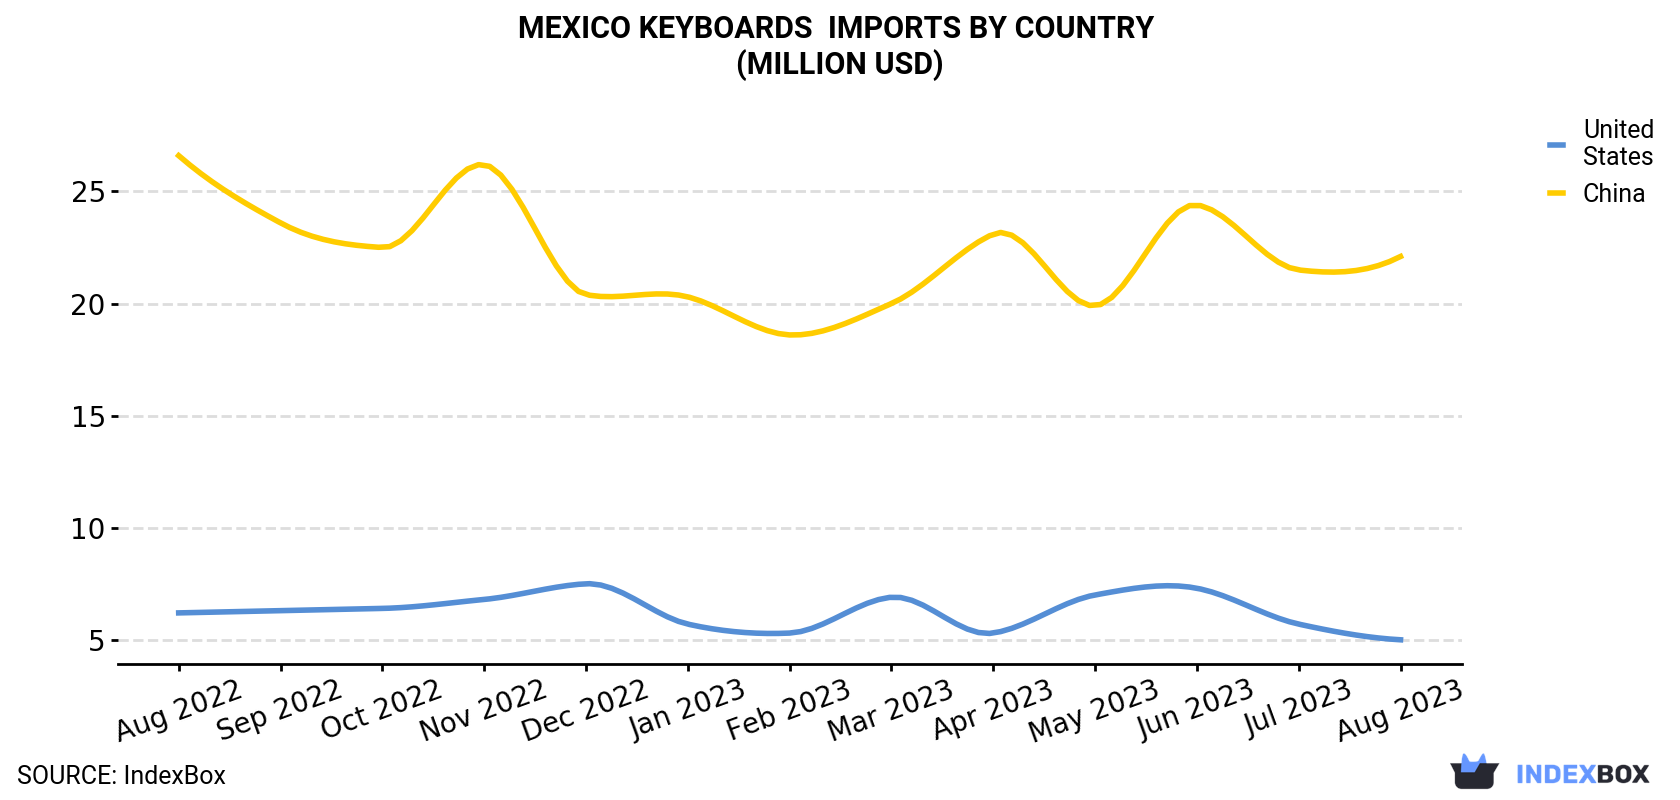 Mexico Keyboards Imports By Country (Million USD)